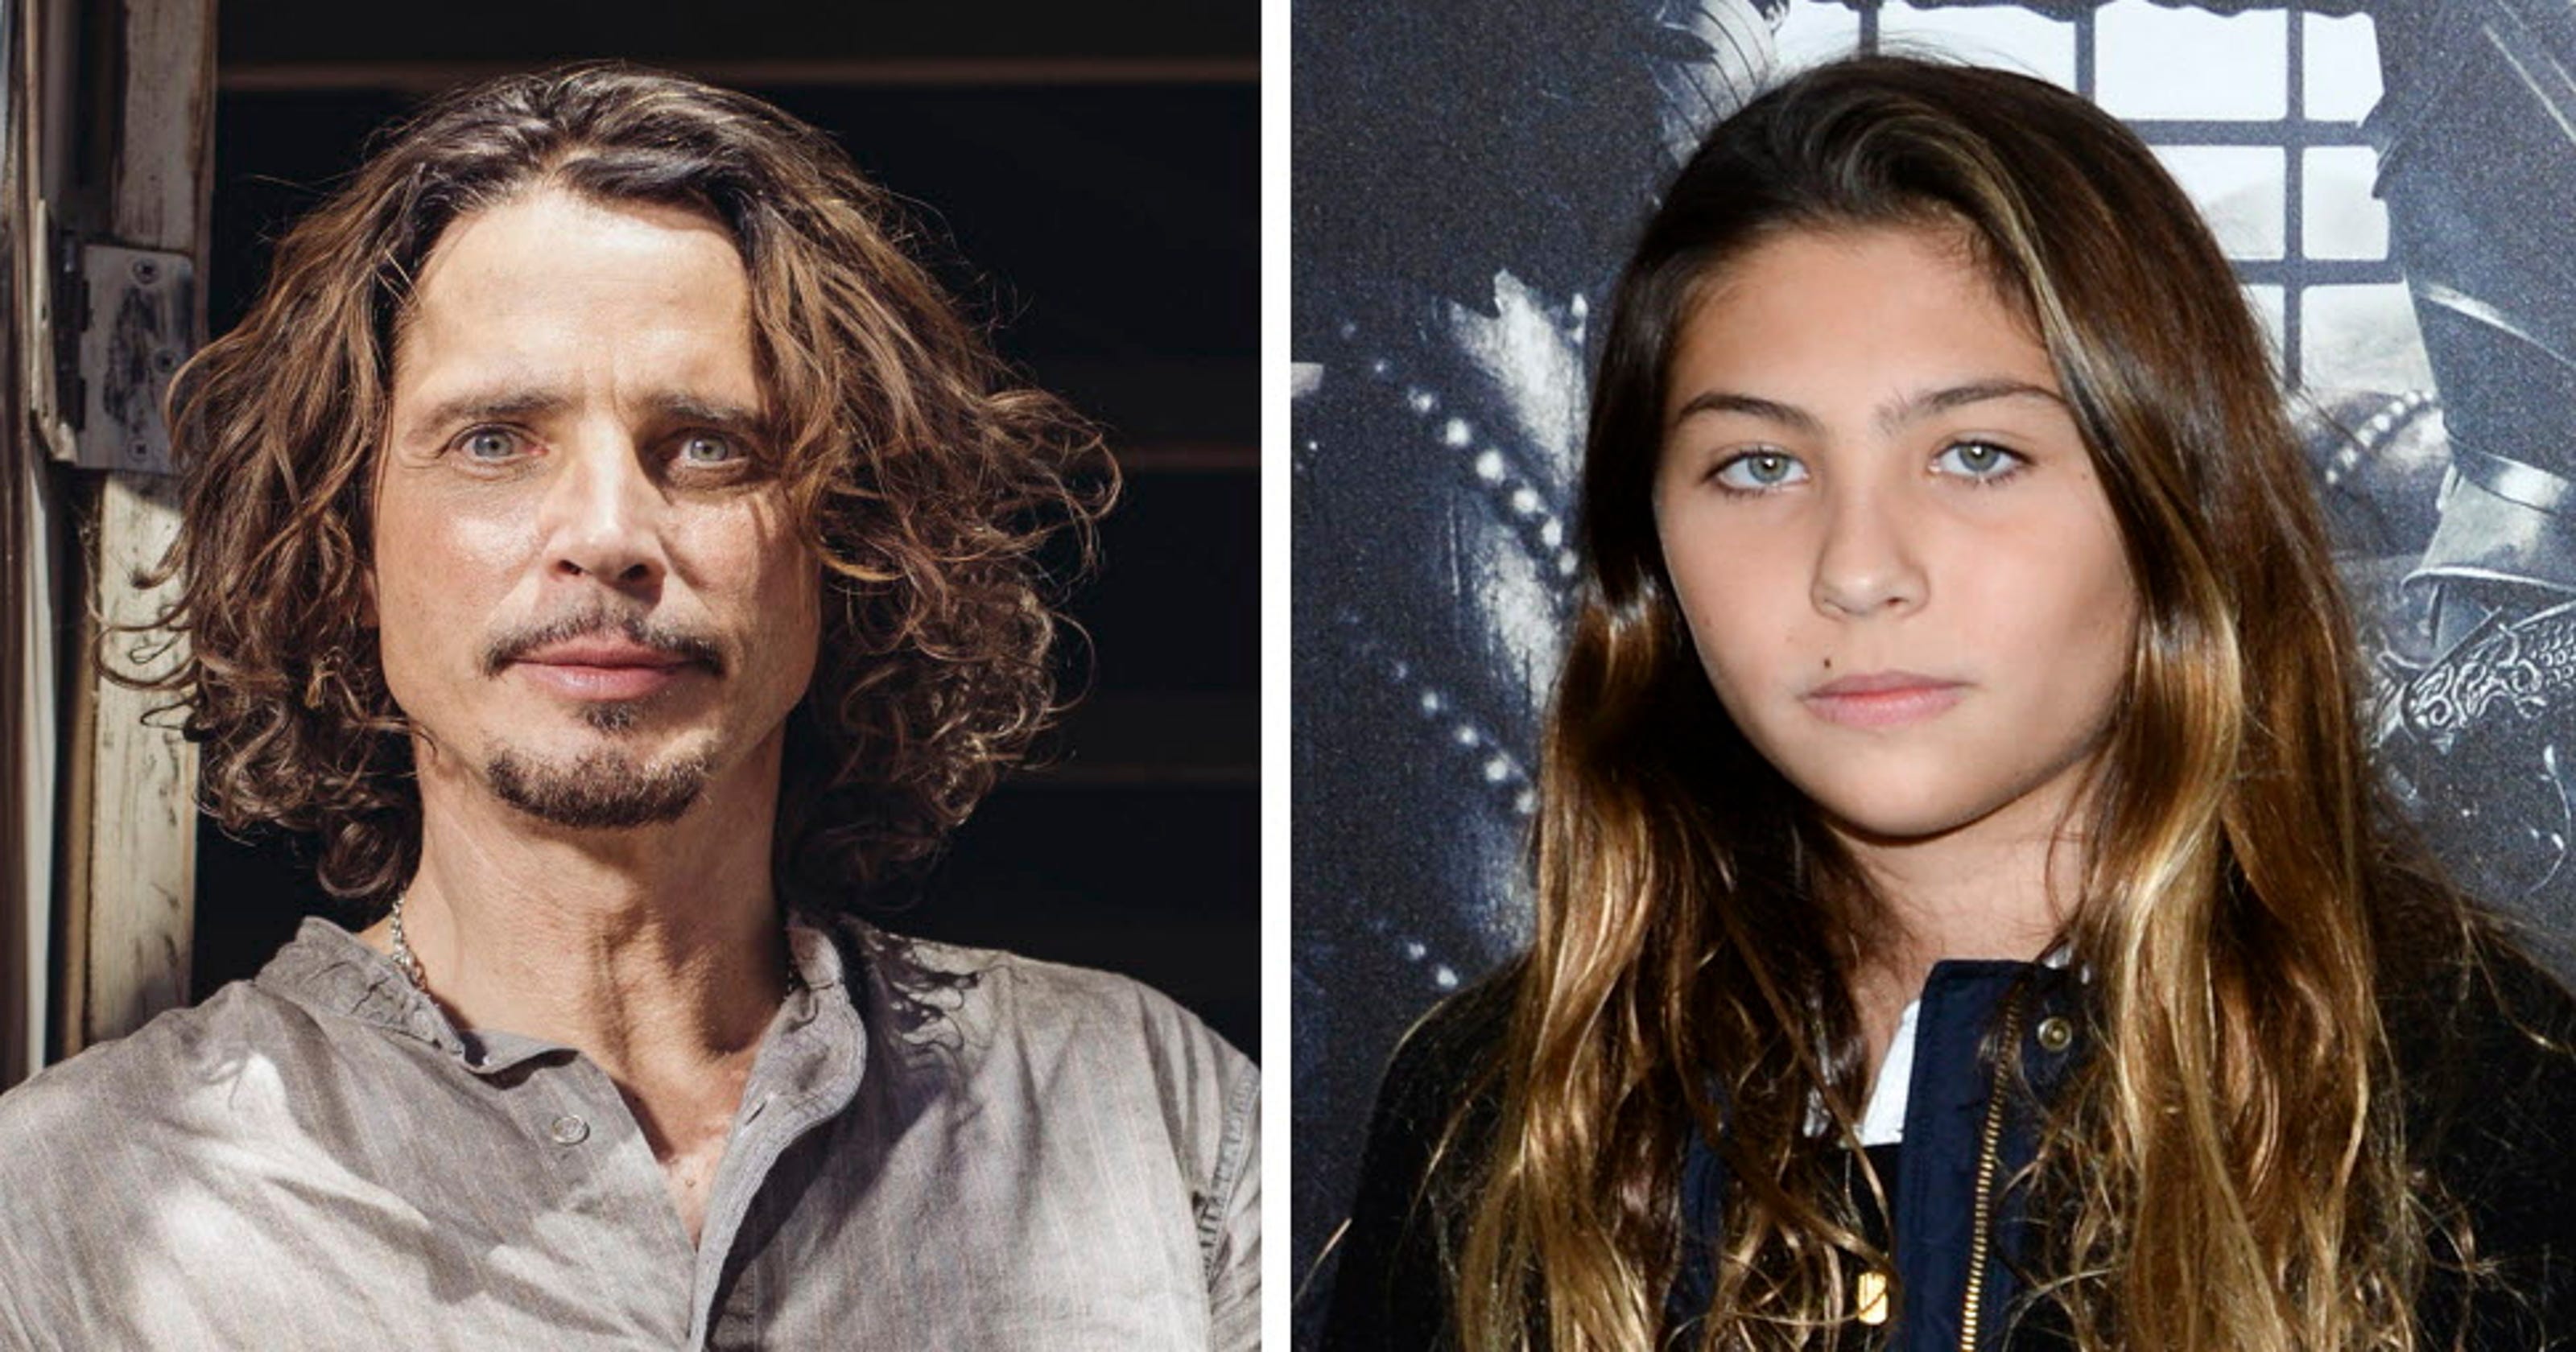 Chris Cornell's daughter, 13, honors him on Father's Day with duet